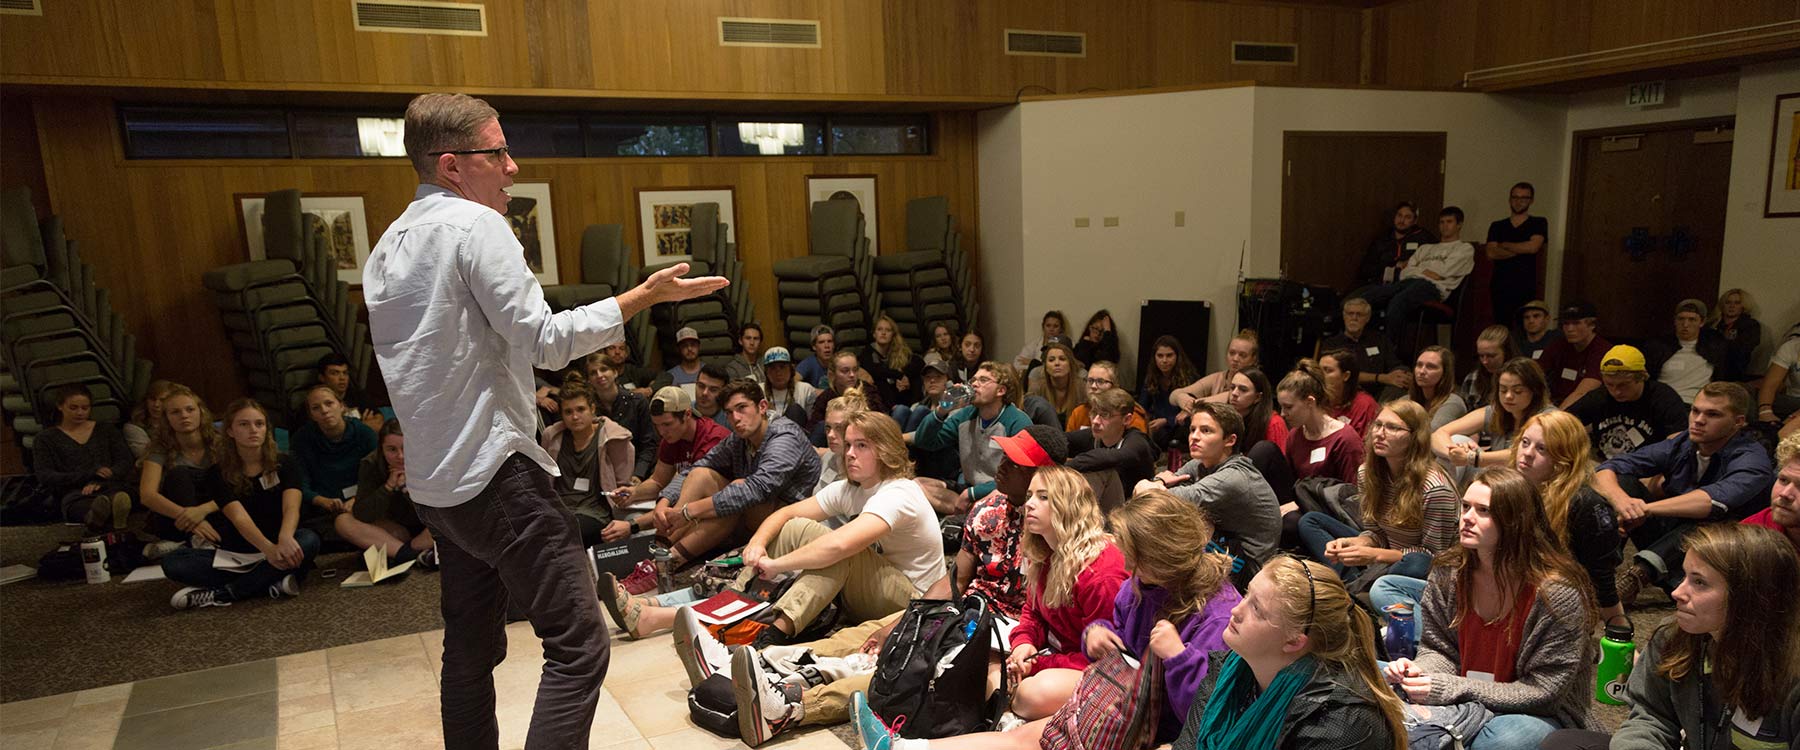 Kent McDonald speaks in front of a large group of students seated on the floor.